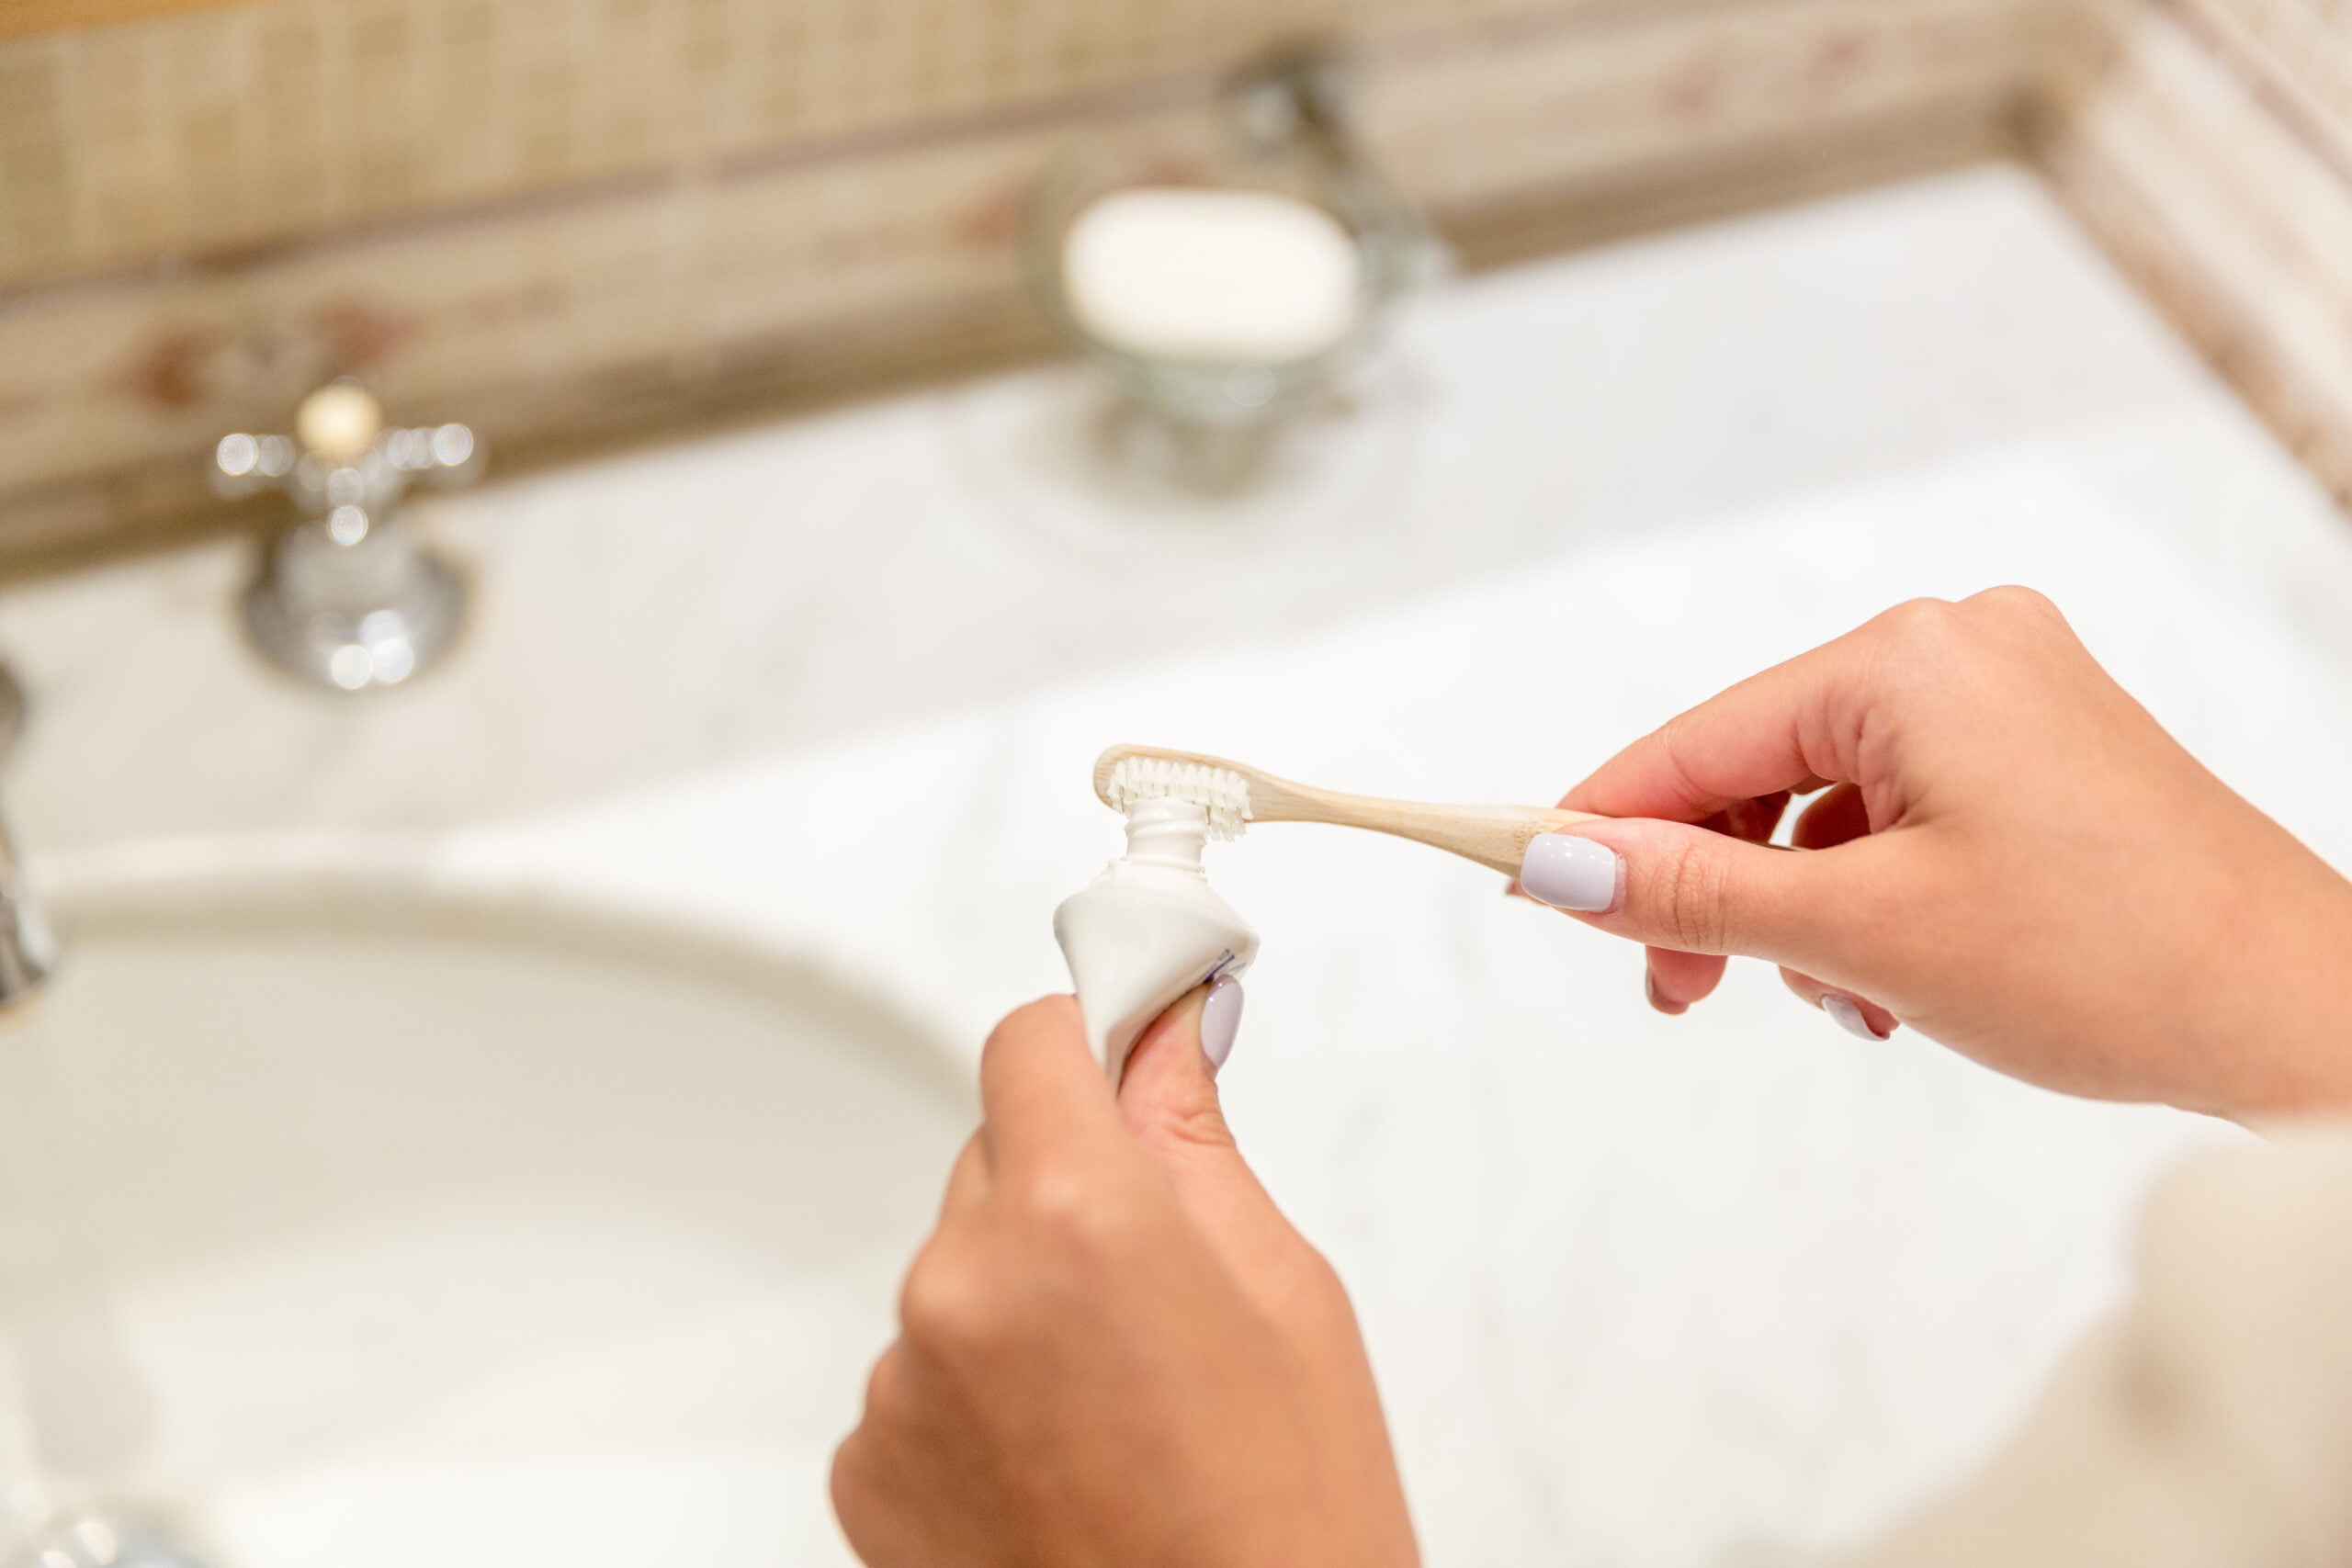 Do Tooth whitening toothpastes really work?